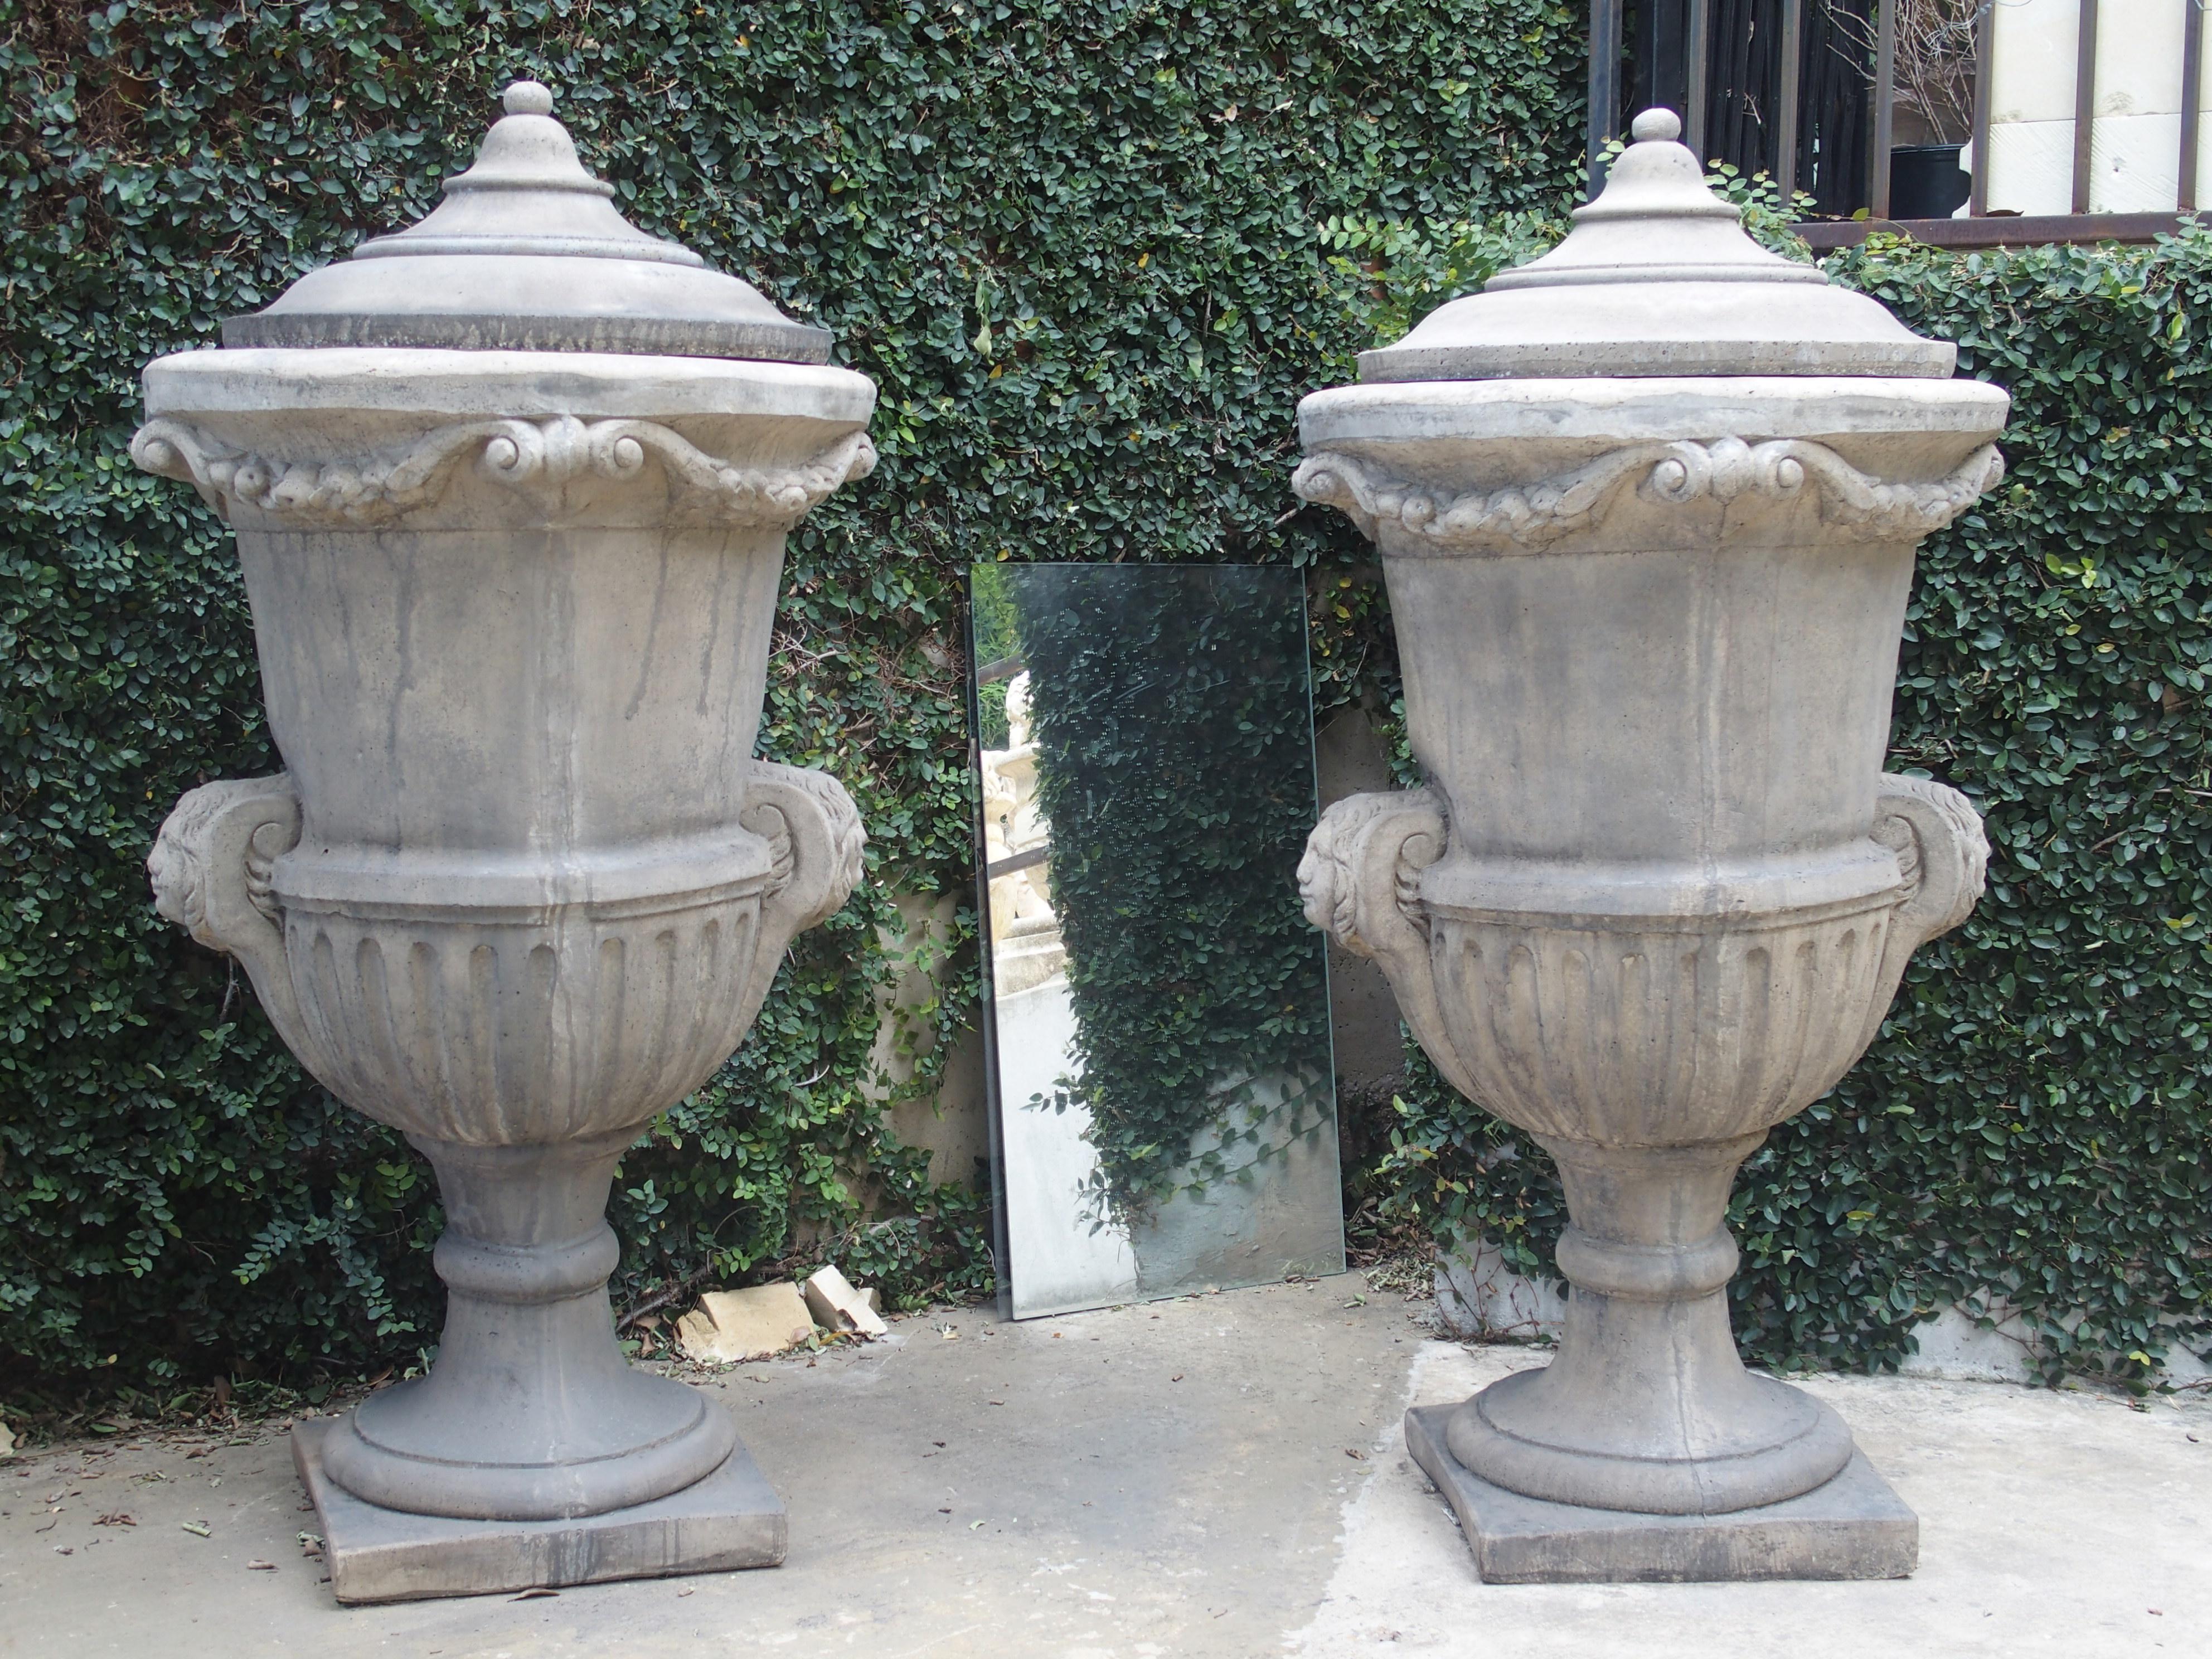 These tall cast stone garden vases from Belgium have lids which allows them to be used as large planters in the summer and garden lidded garden ornaments in the winter. They have swags of fruit and foliation ending in C-Scrolls beneath the lid. On